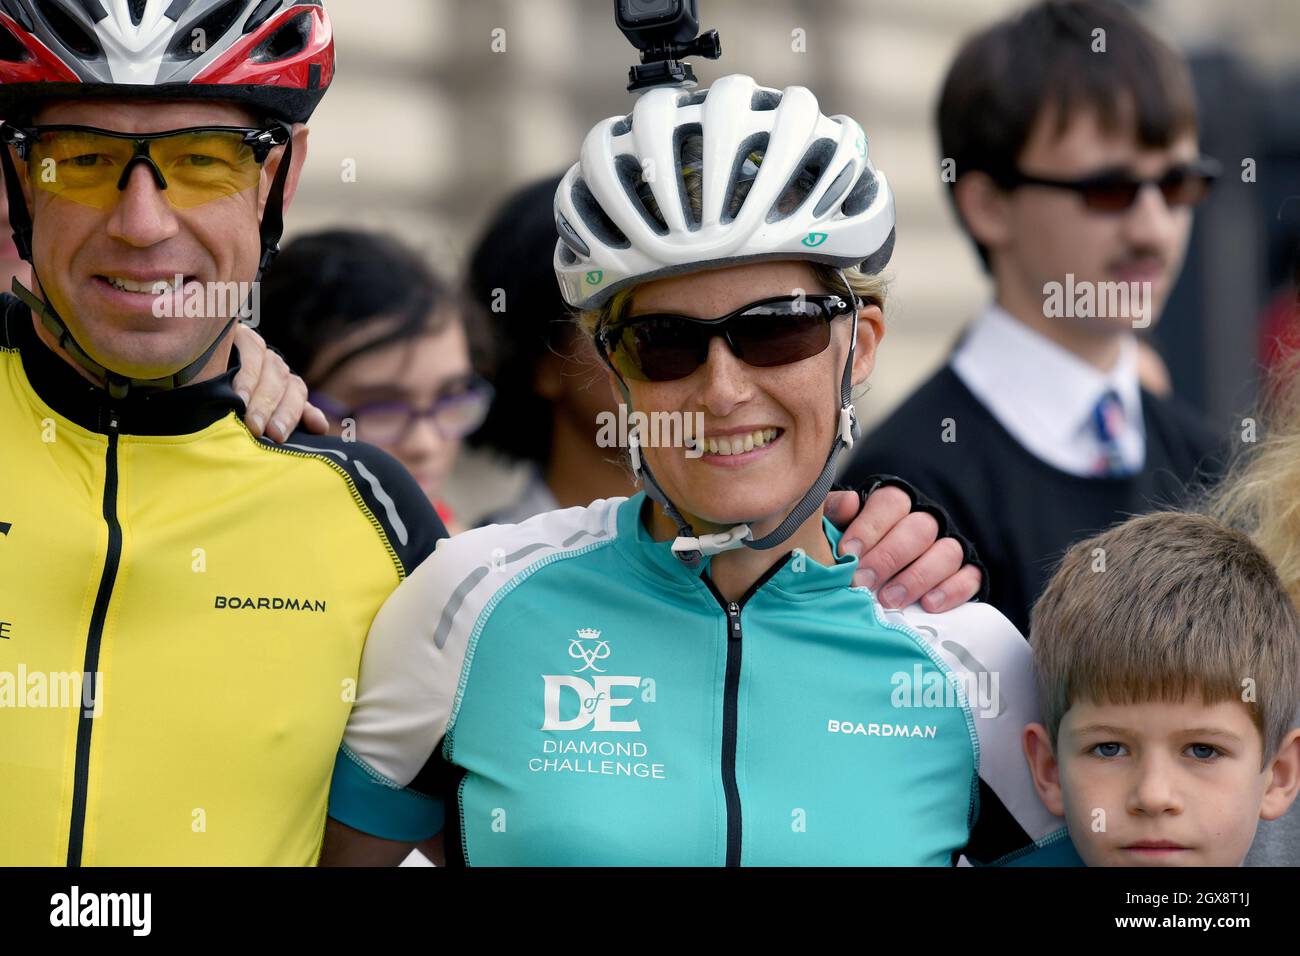 Sophie, Countess of Wessex smiles as she stands with her son, James, Viscount Severn after arriving at Buckingham Palace to complete her bike ride from Edinburgh to London in support of The Duke of Edinburgh's Award on September 25, 2016. Stock Photo